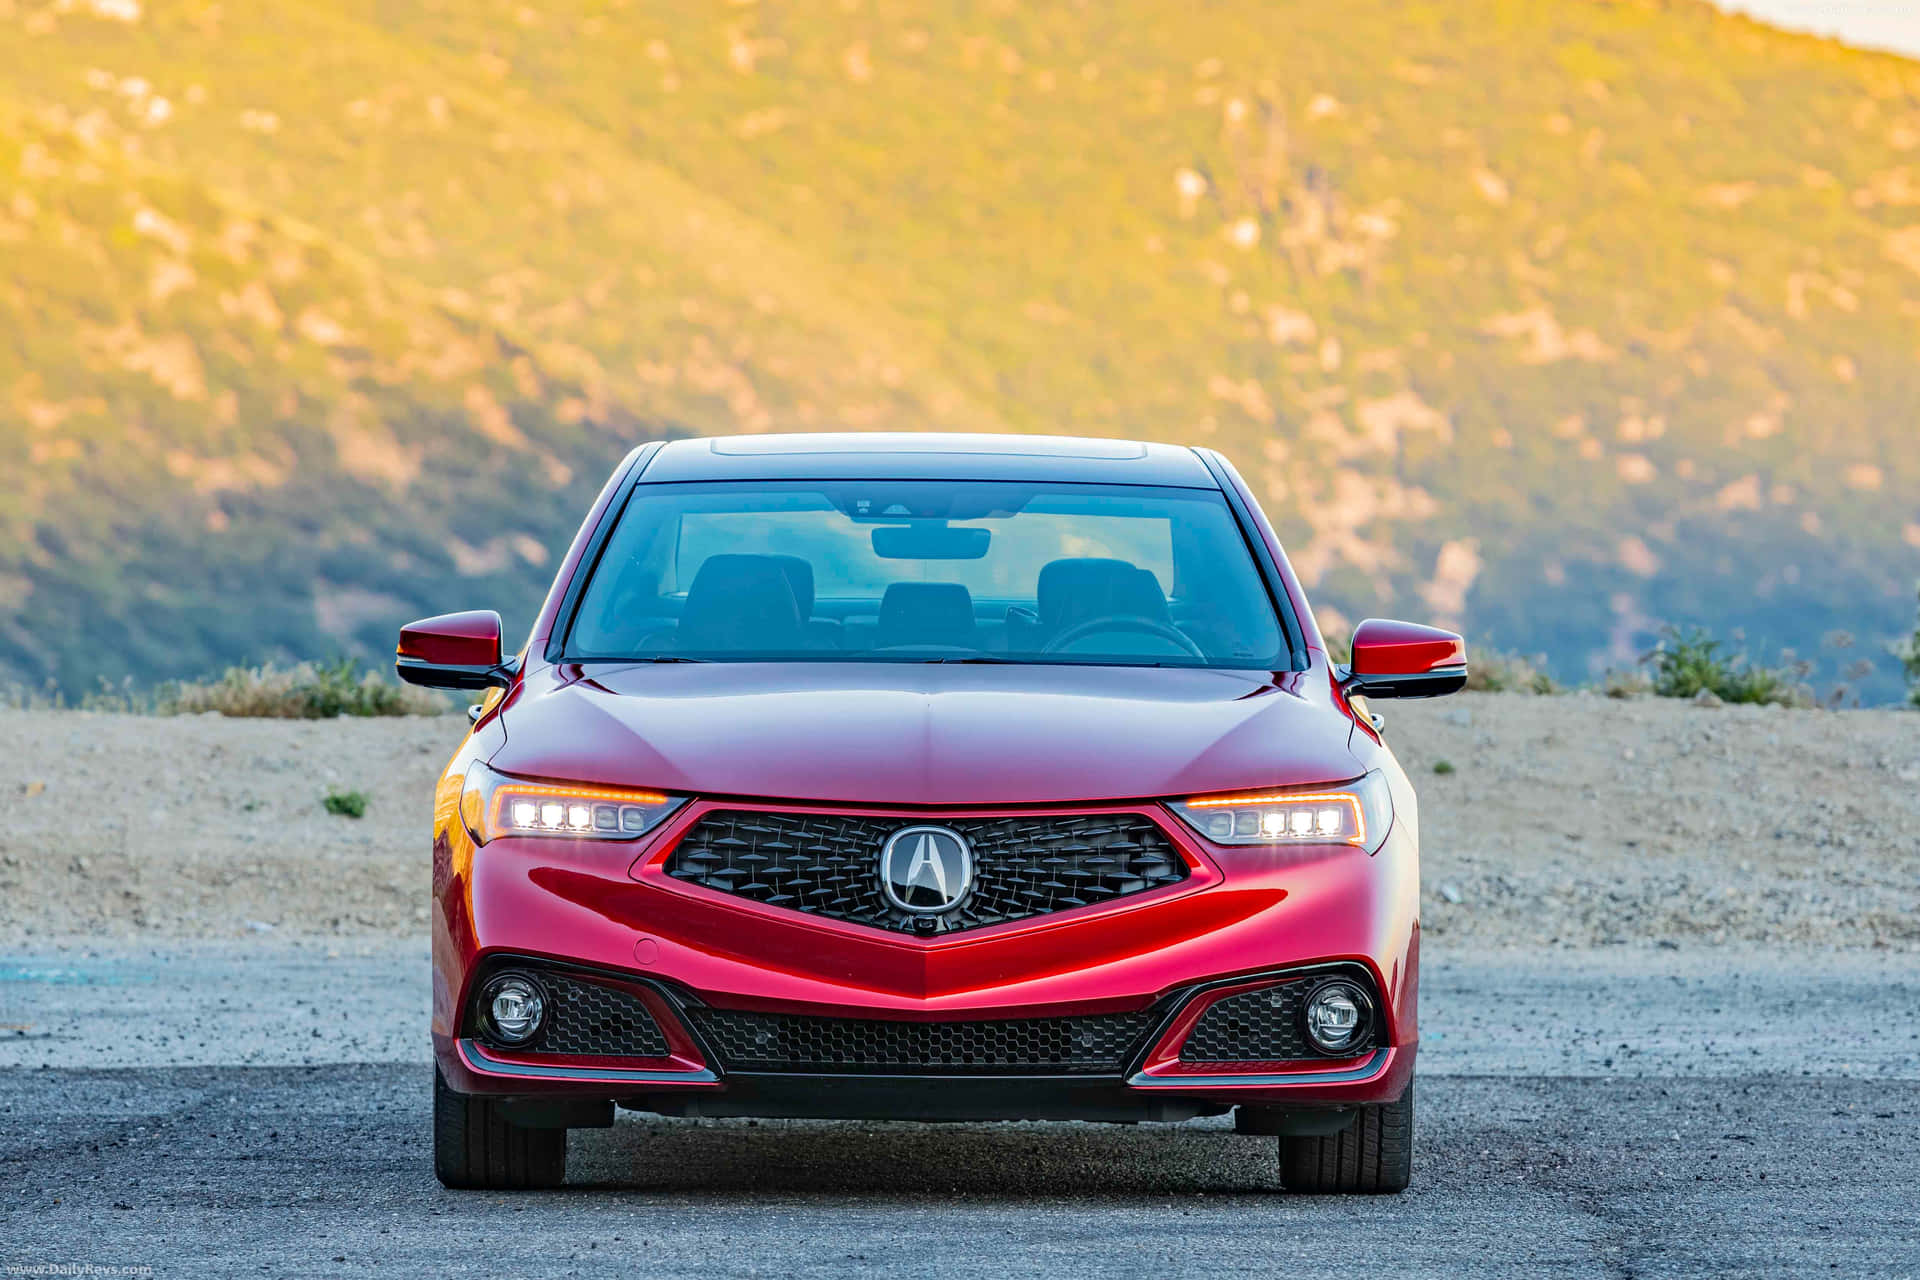 The Red 2019 Acura Rdx Is Parked On A Dirt Road